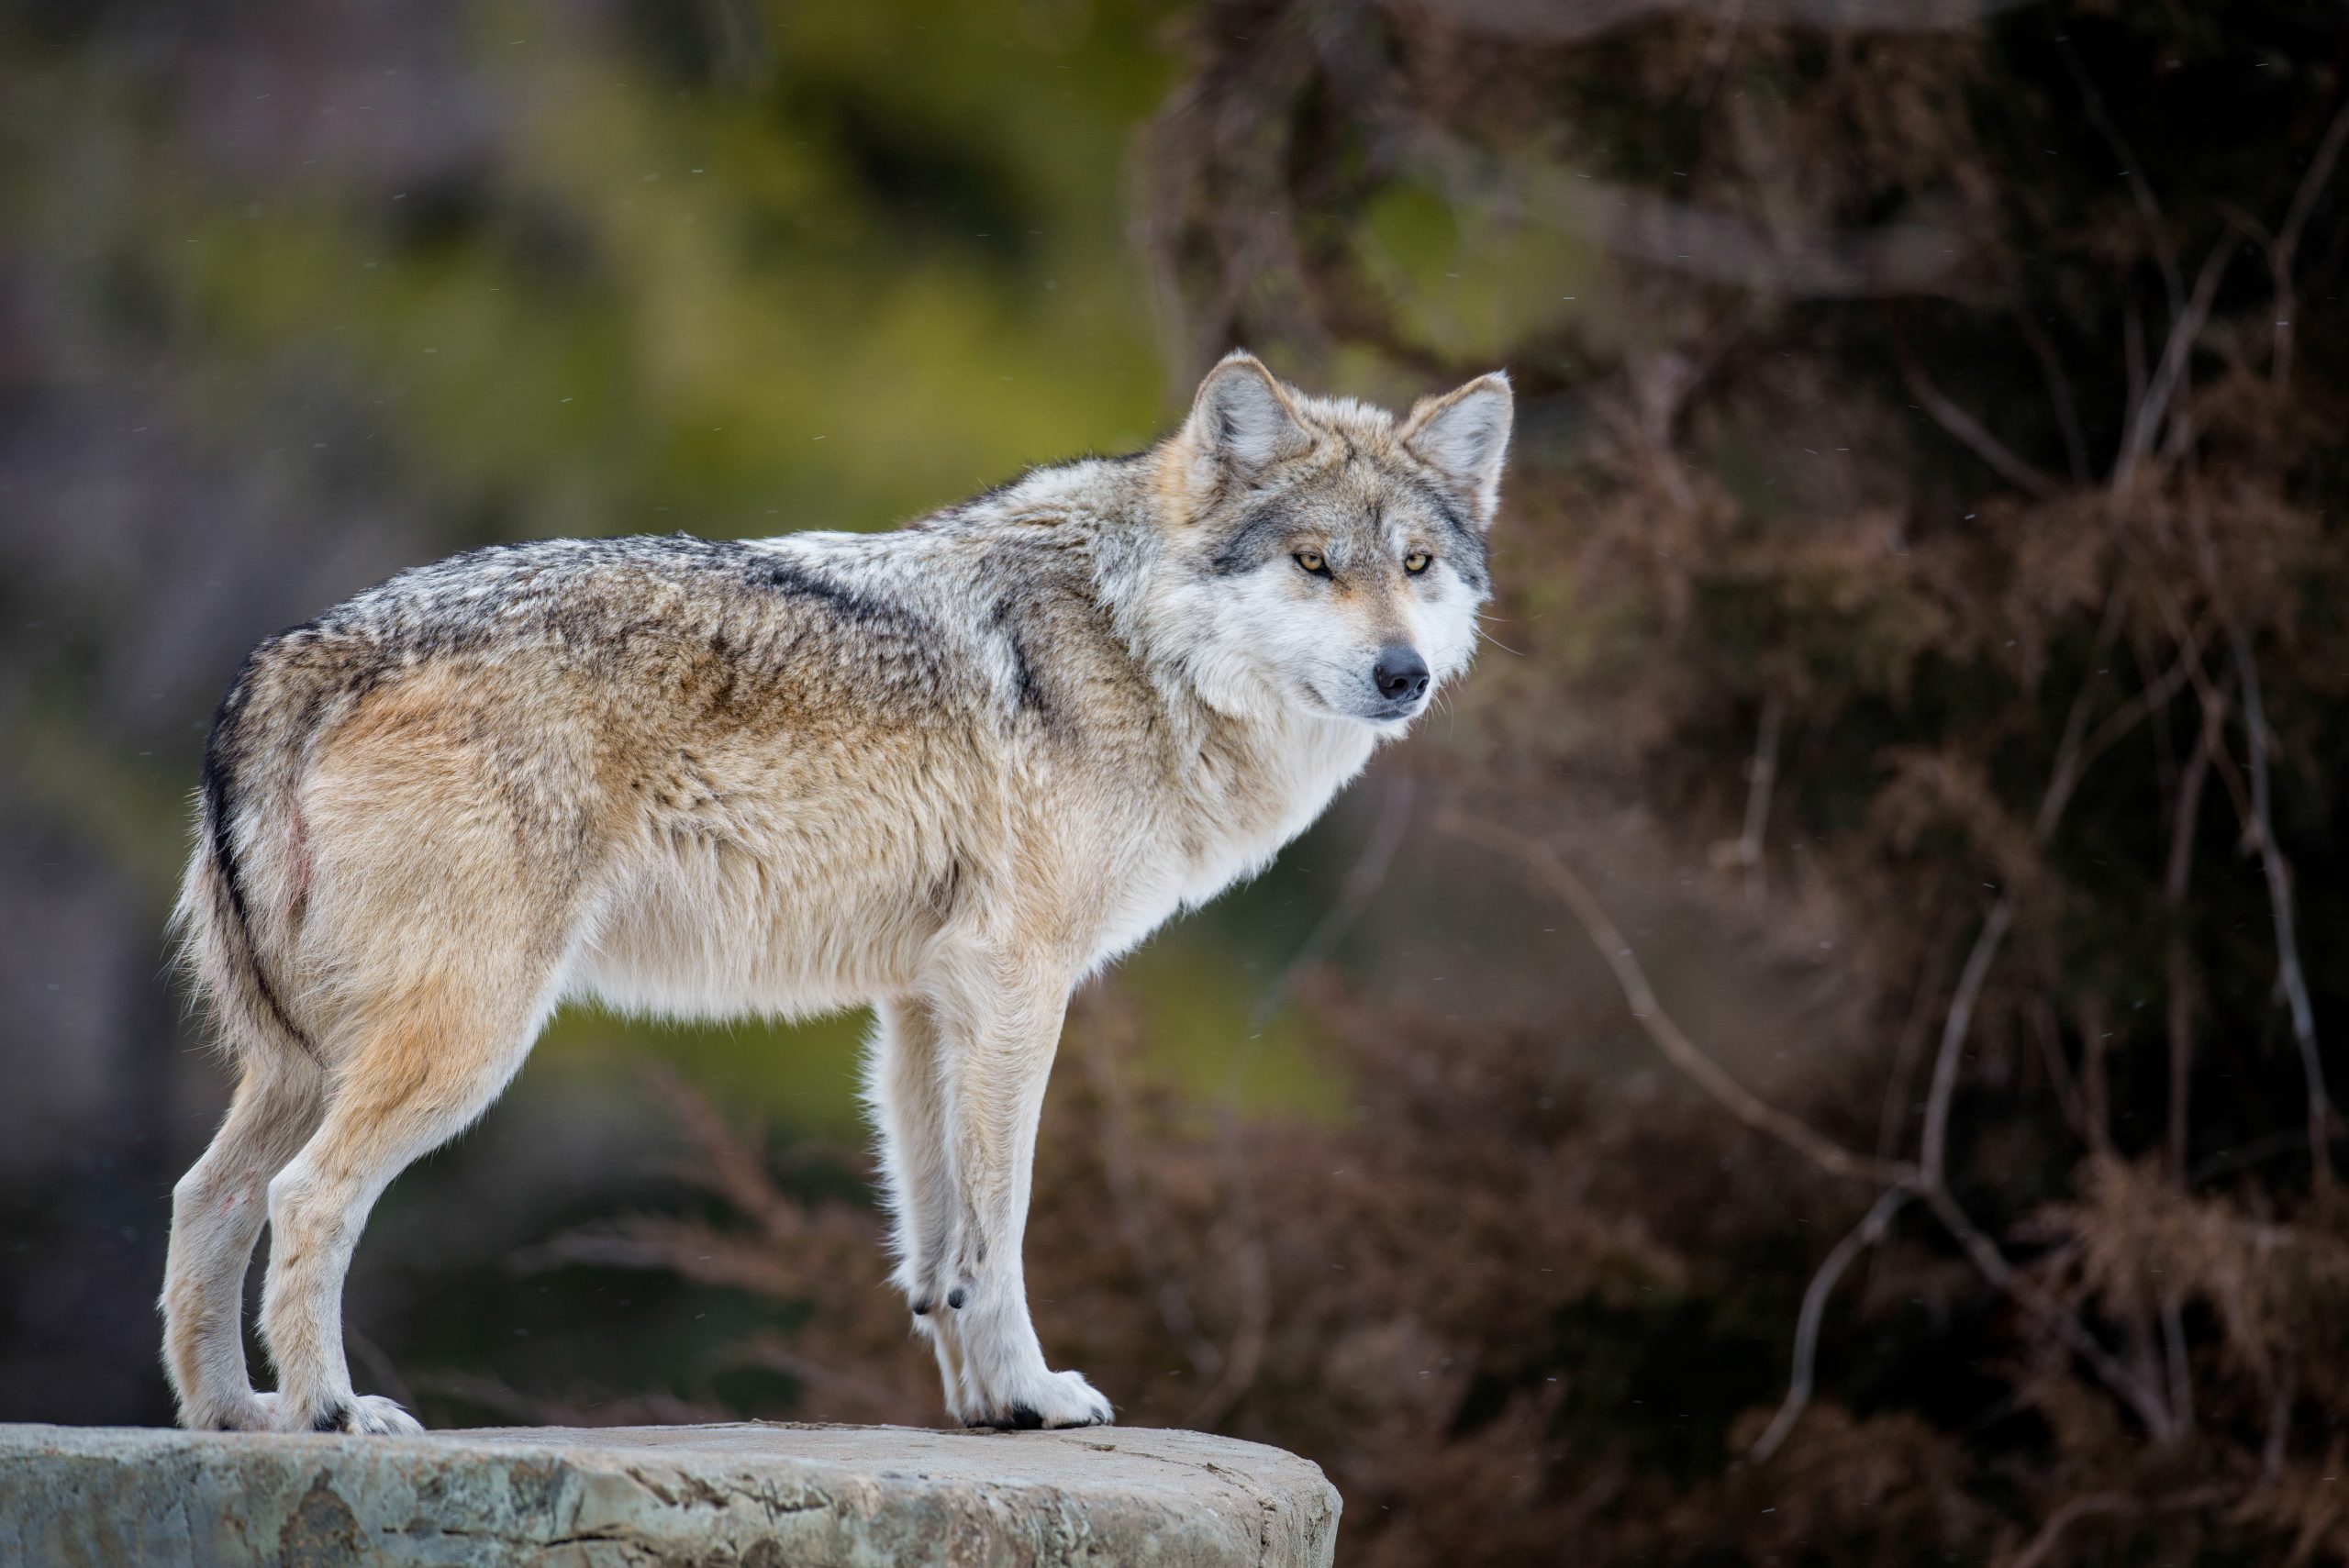 Lone wolf no more: Mr. Goodbar now traveling with single female near Gila forest